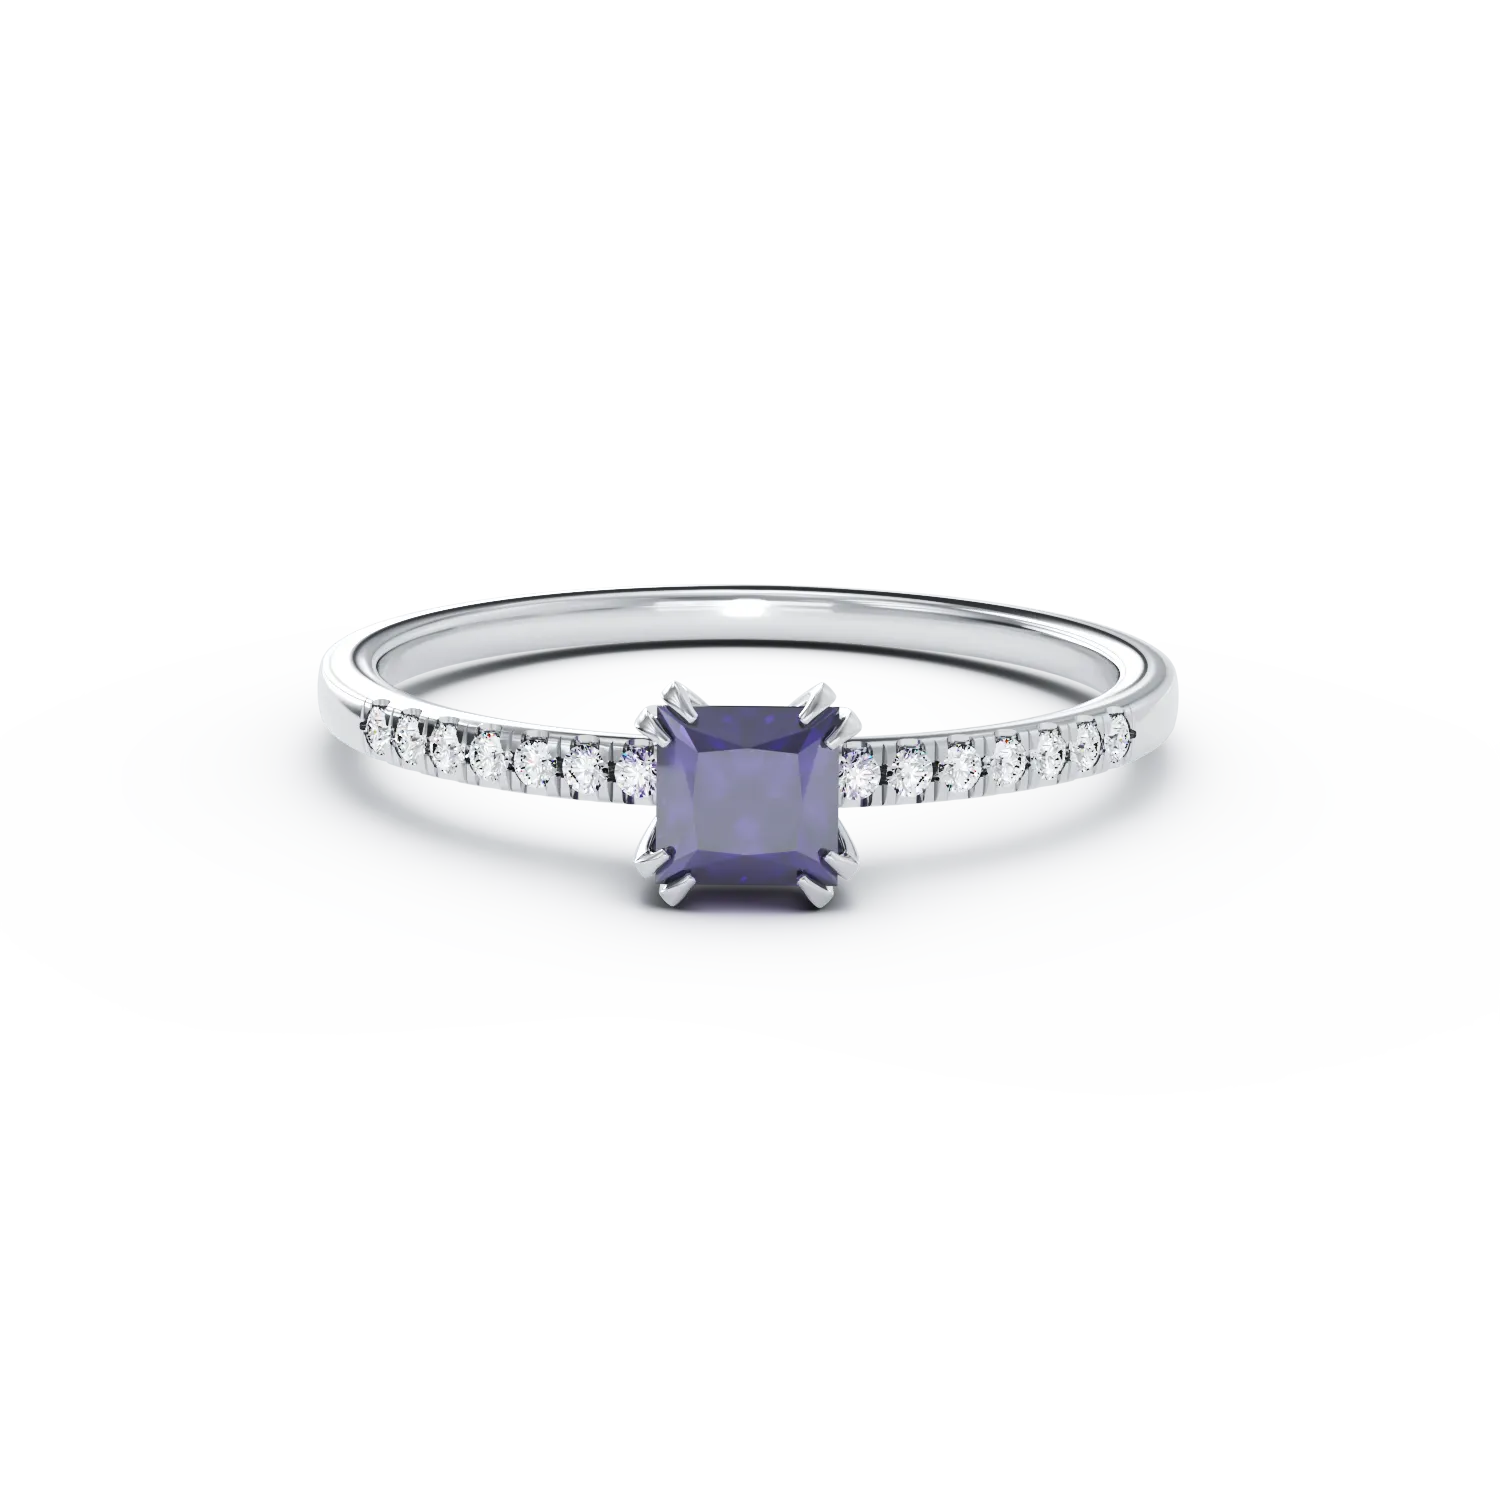 18K white gold engagement ring with tanzanite of 0.4ct and diamonds of 0.05ct